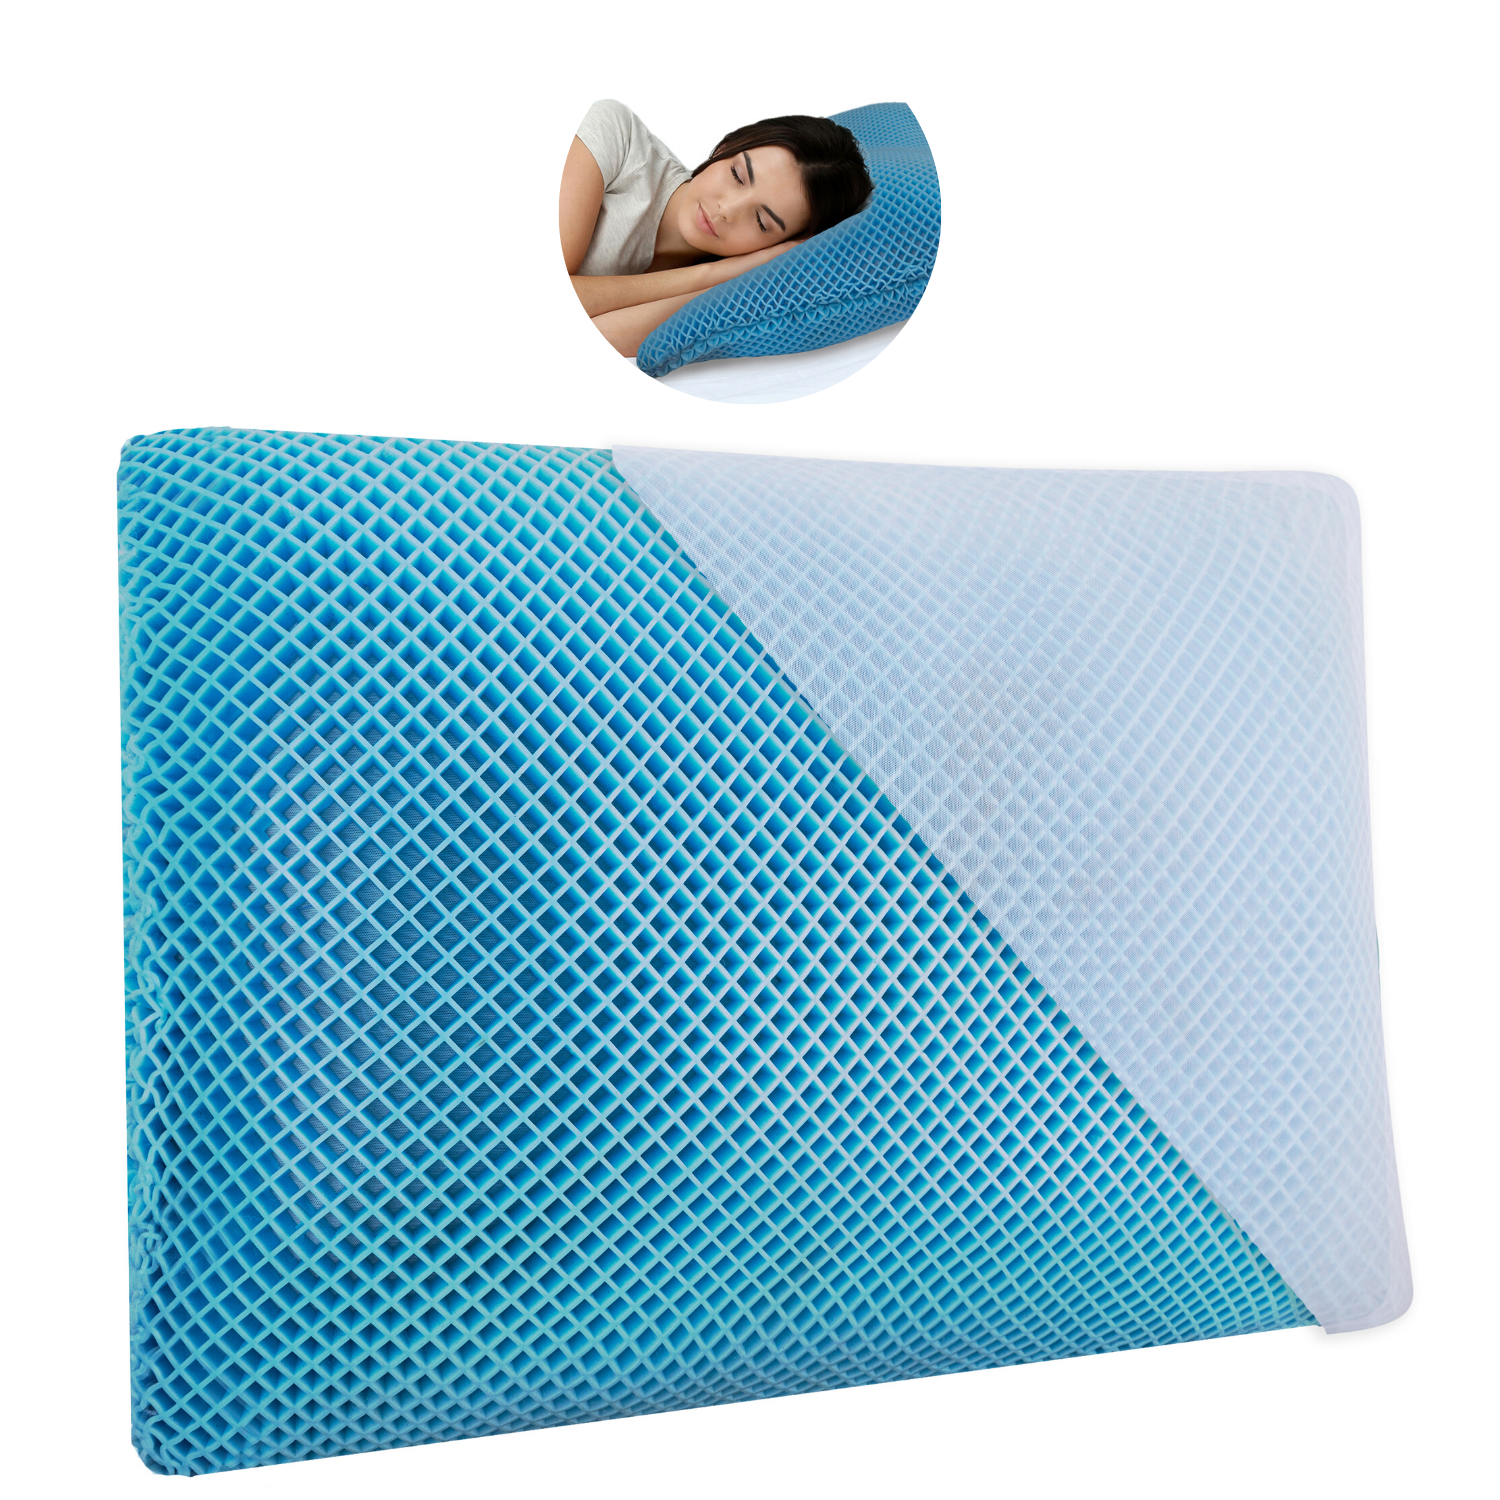 https://www.fomicare.com/wp-content/uploads/2020/06/gel-cooling-pillow-comfortable-neck-premium-thick.jpg.png